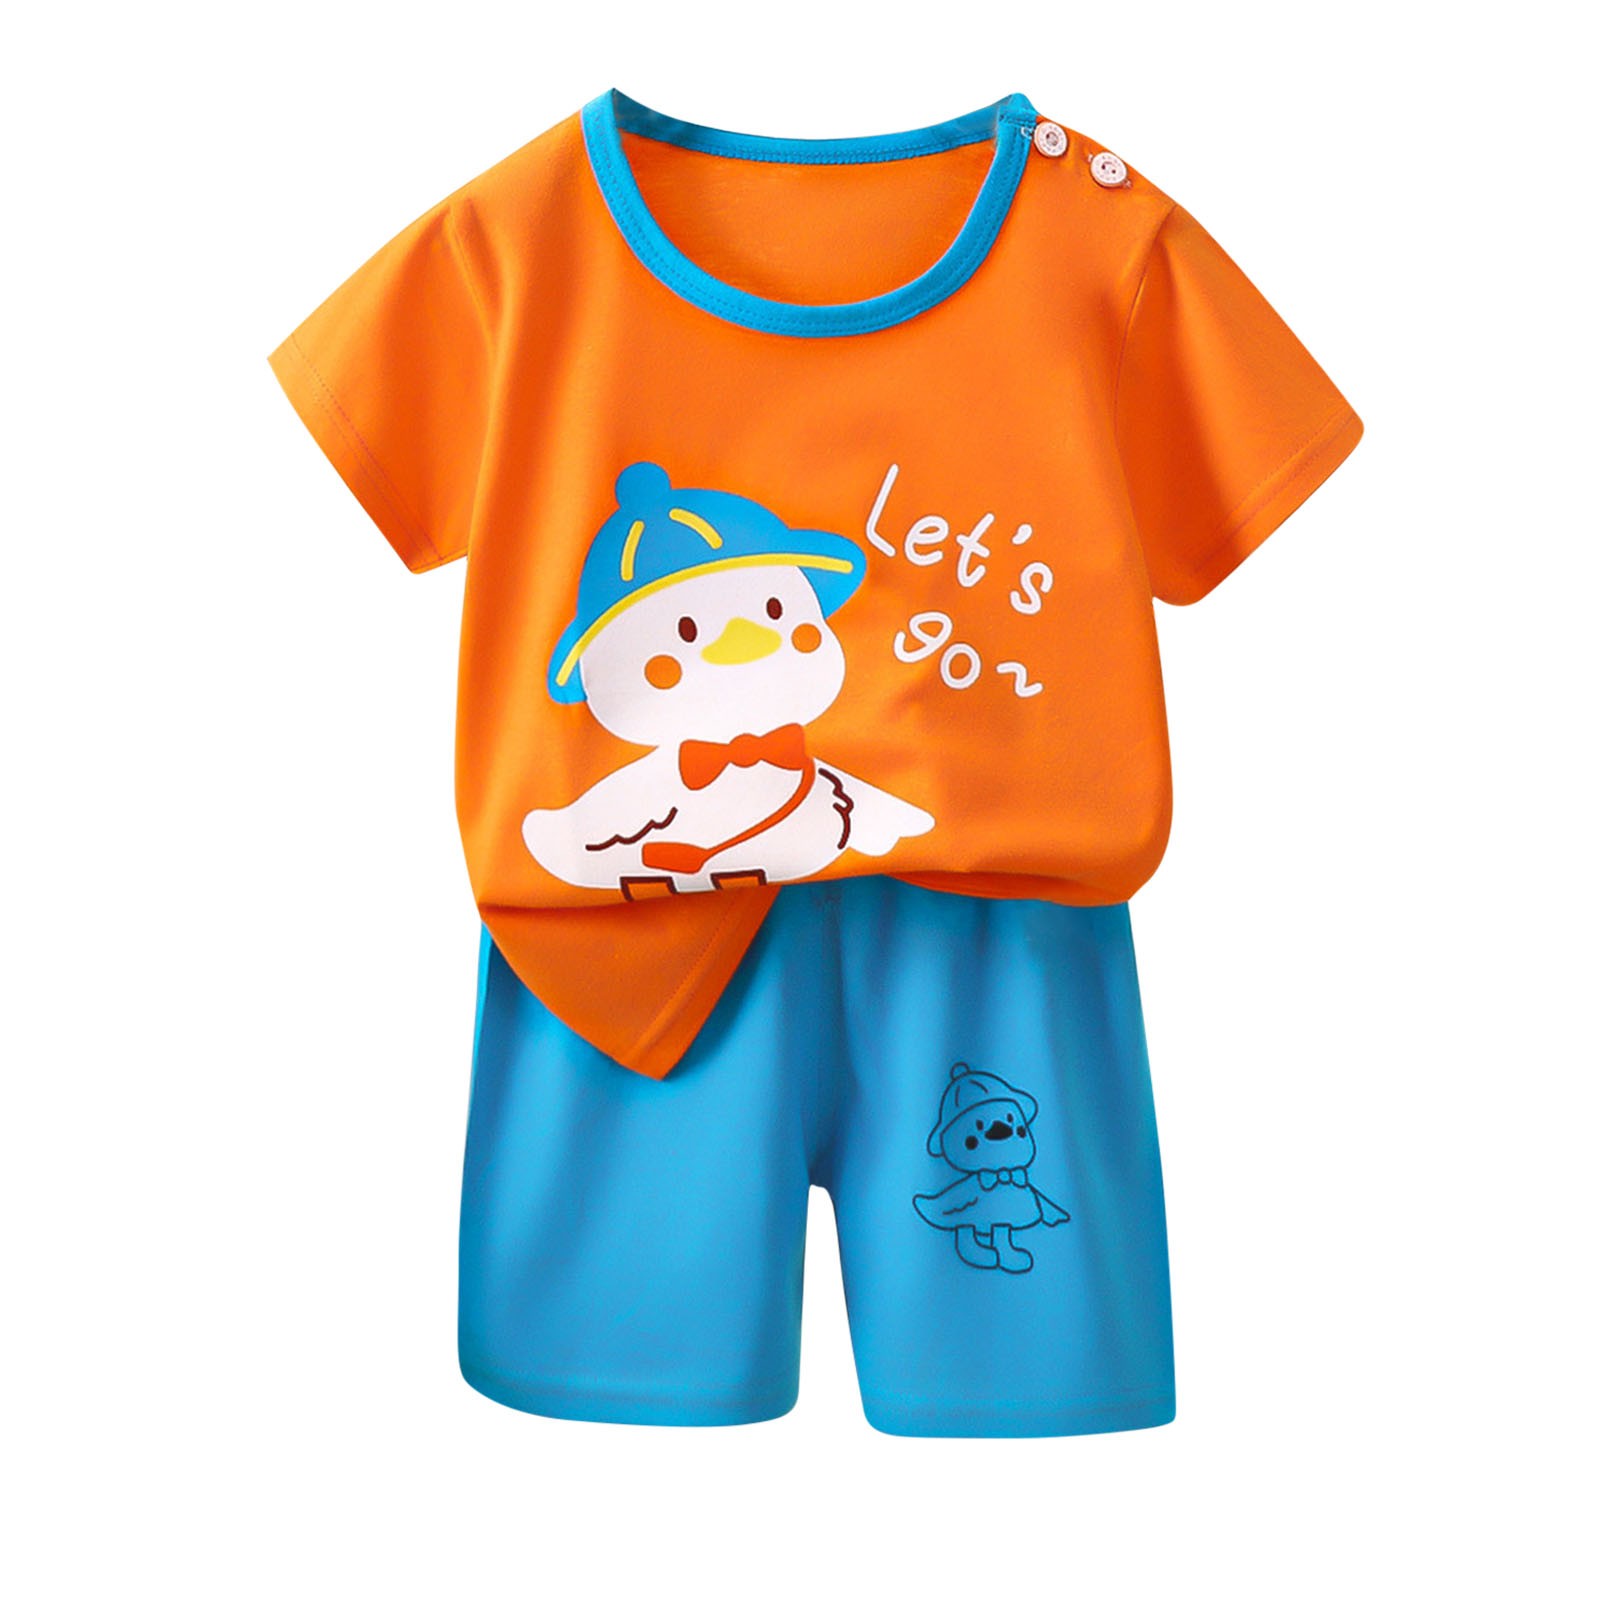 Fesfesfes Toddler Outfits Summer Girls And Boys T-shirt Baby Suits ...